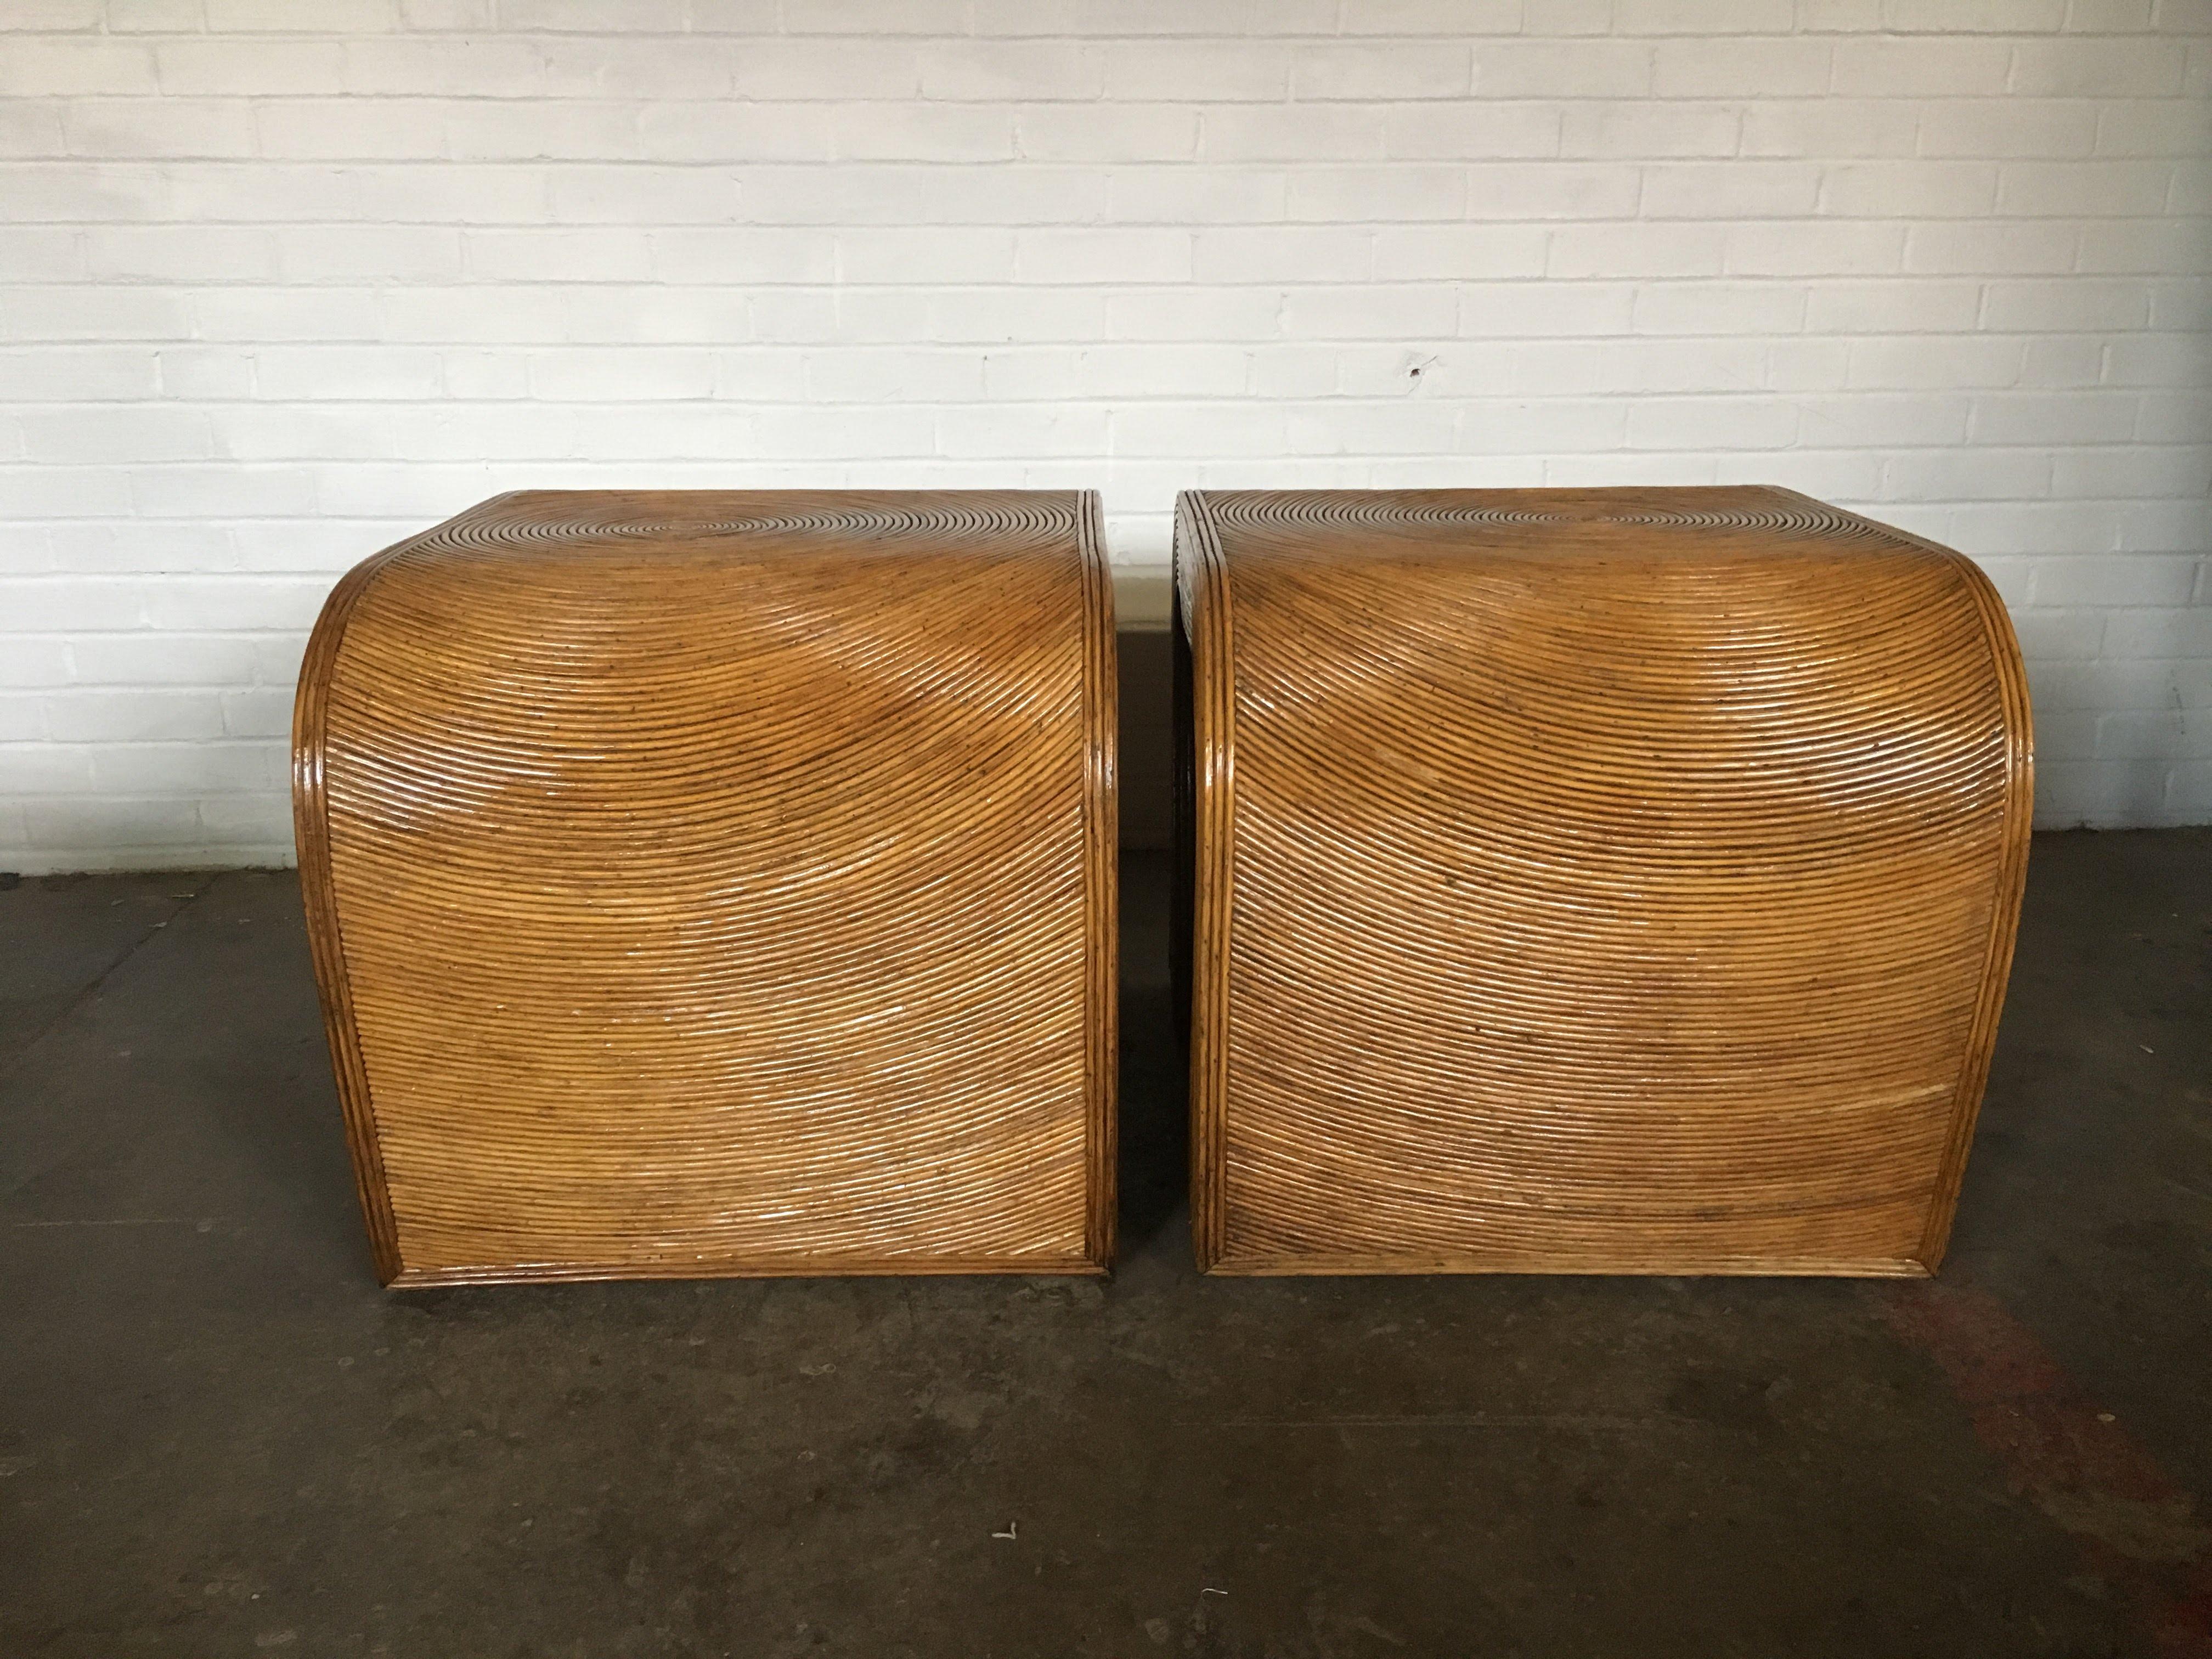 Such lovely pieces that you can use as end tables or nightstands.
These Crespi style pieces are pure elegance.
Great condition with no broken or missing pieces.

Each Table is:
22